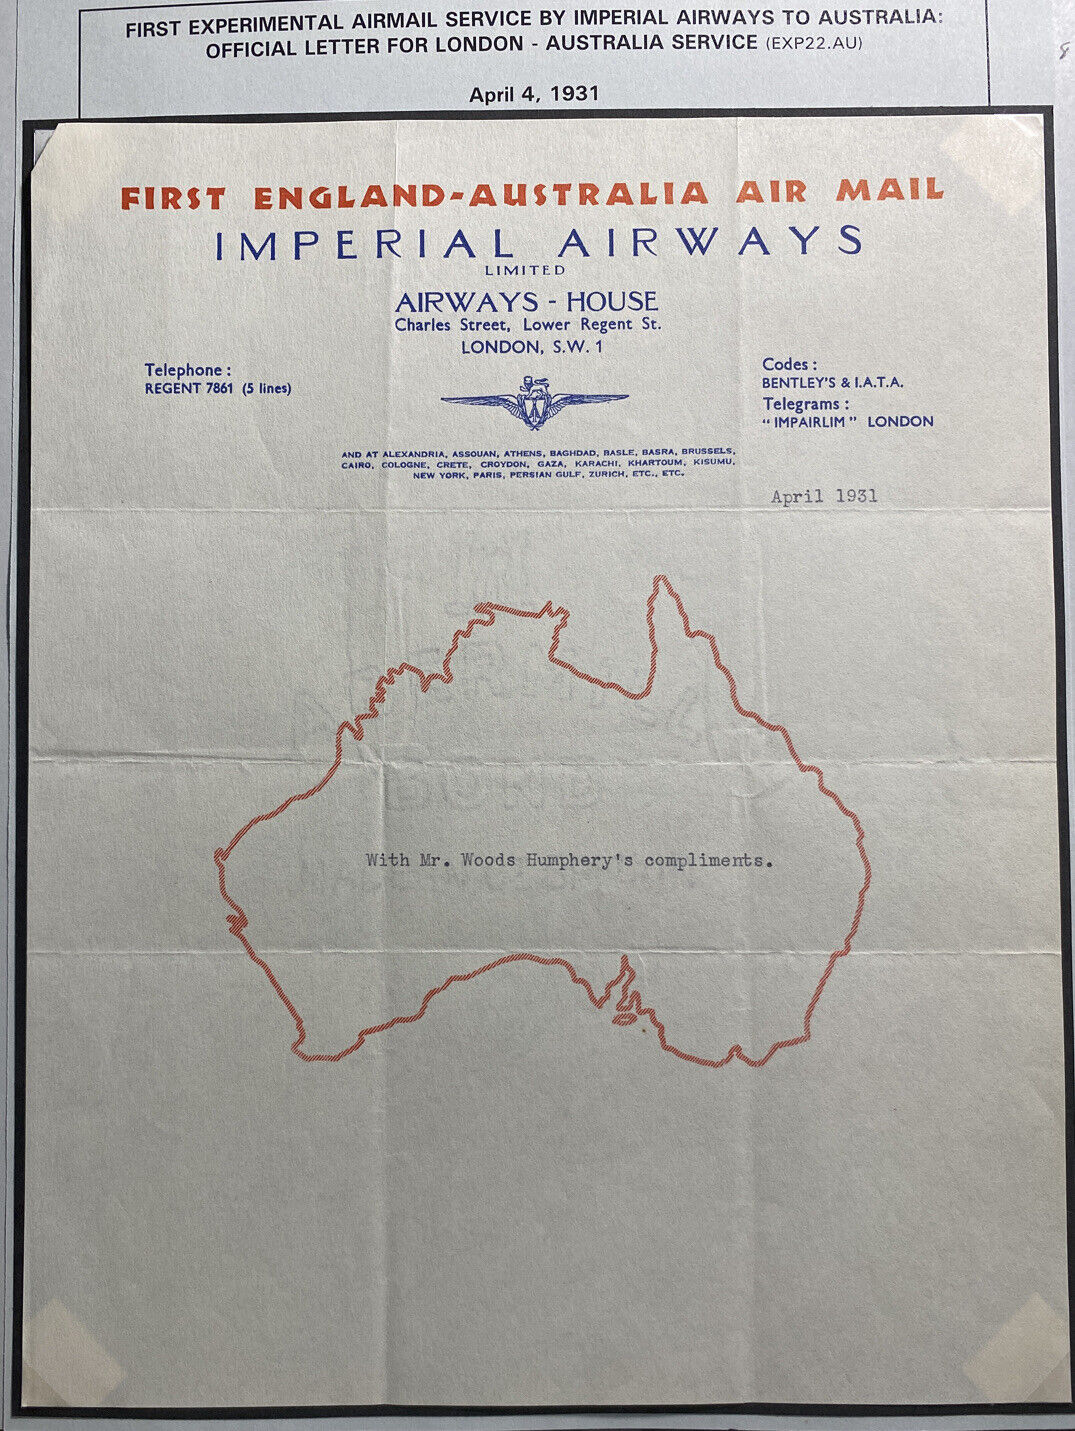 England Imperial Airways First Experimental Service To Australia Letter 1931